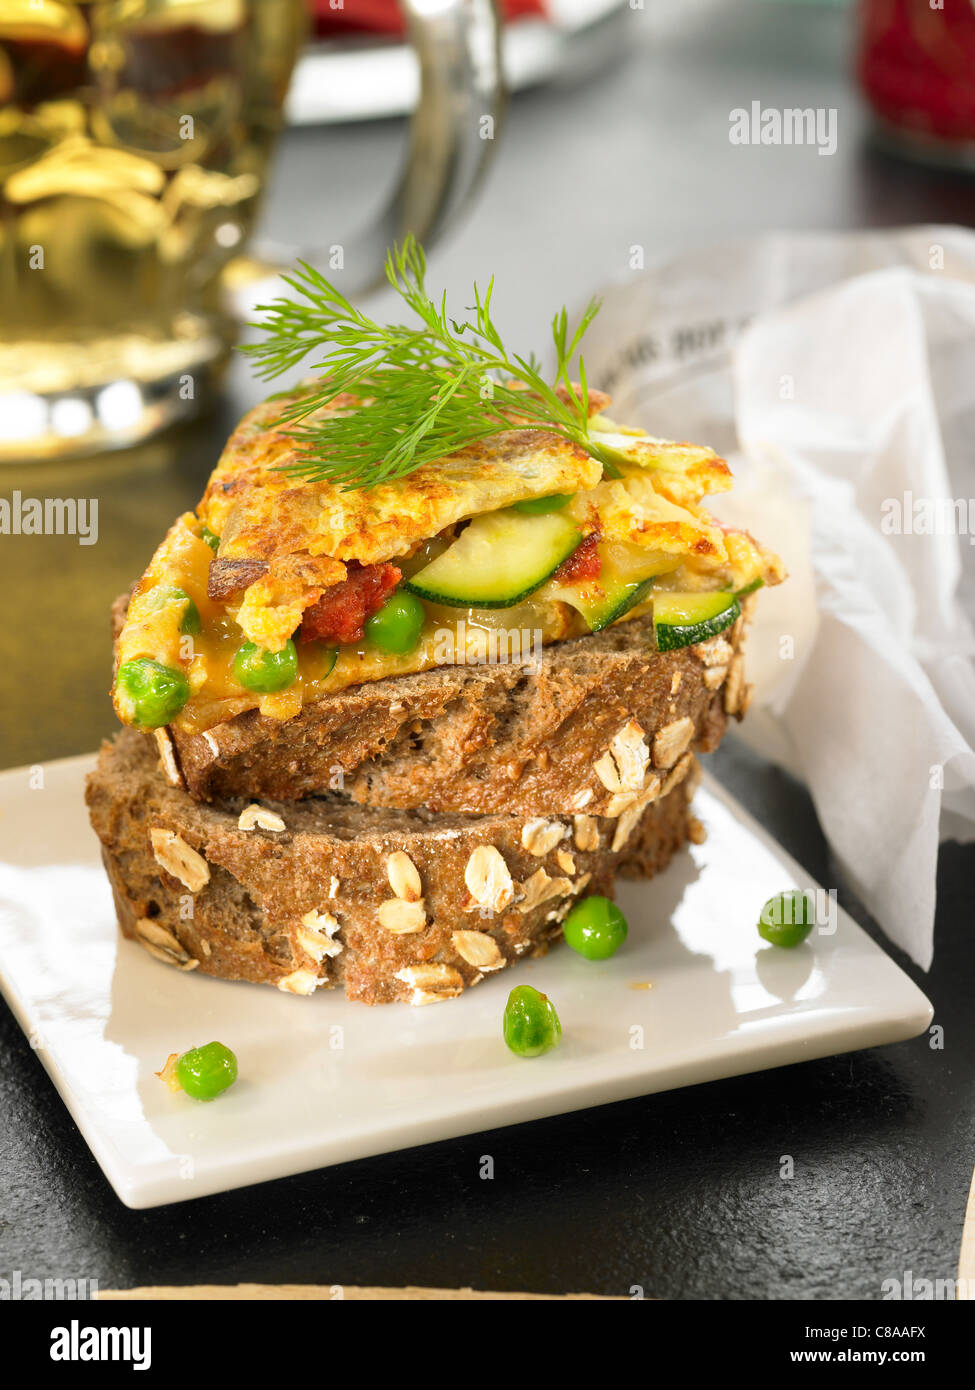 Country-style omelette open sandwich Stock Photo